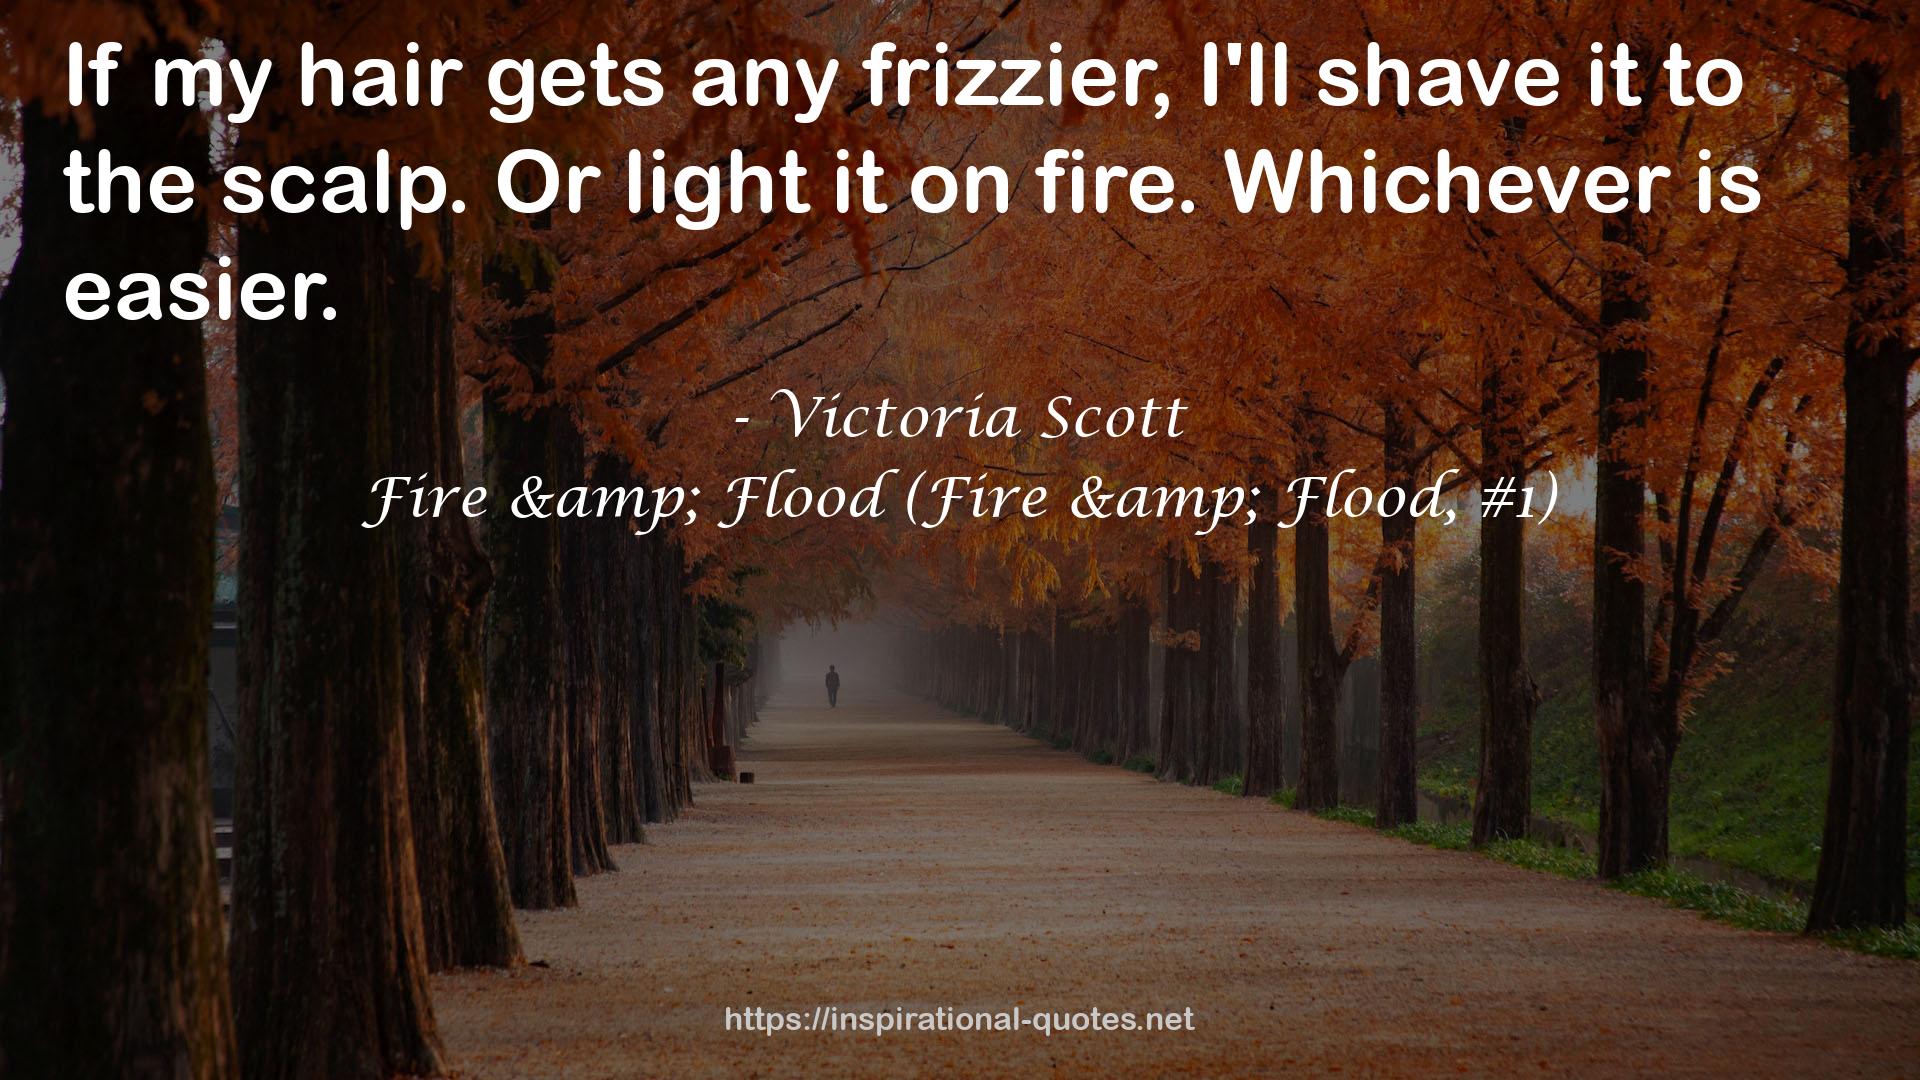 Fire & Flood (Fire & Flood, #1) QUOTES